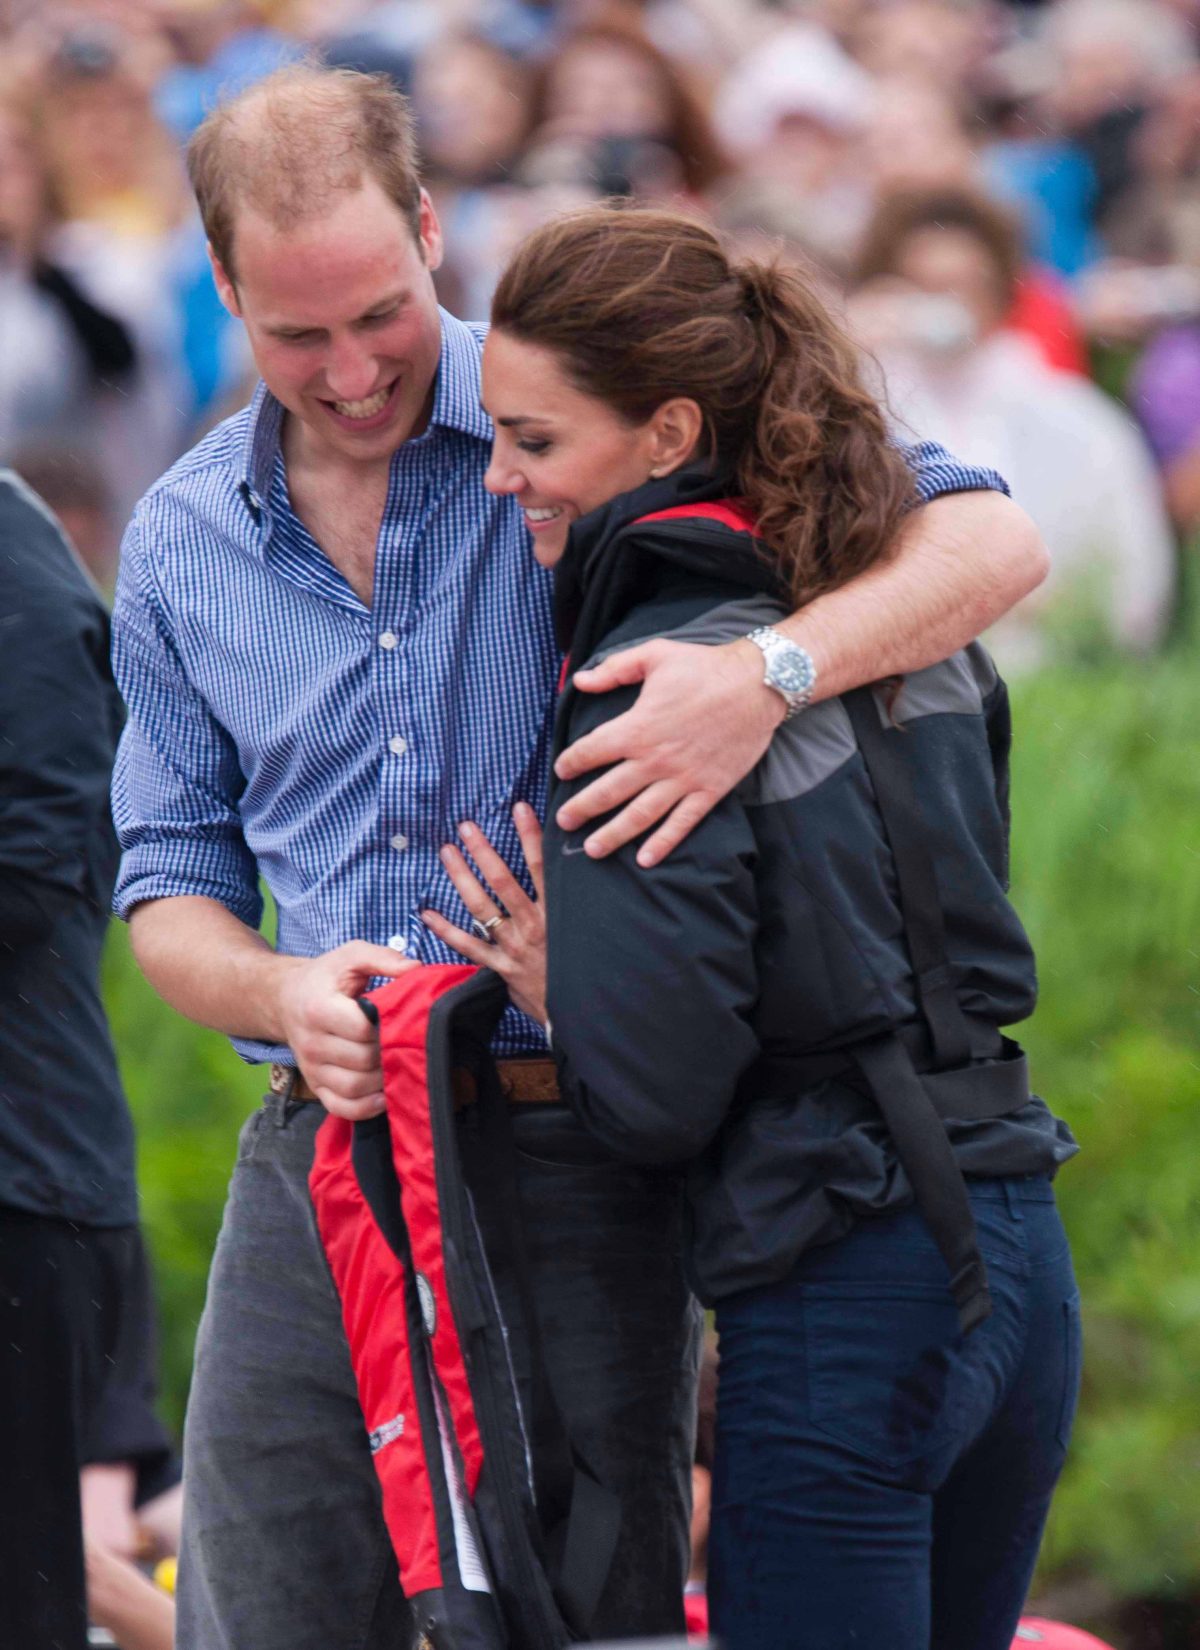 Prince Wiliam and Kate Middleton hug after taking part in a dragon boat race at Dalvay-by-the-sea on day 5 of the Royal Couple's North American Tour